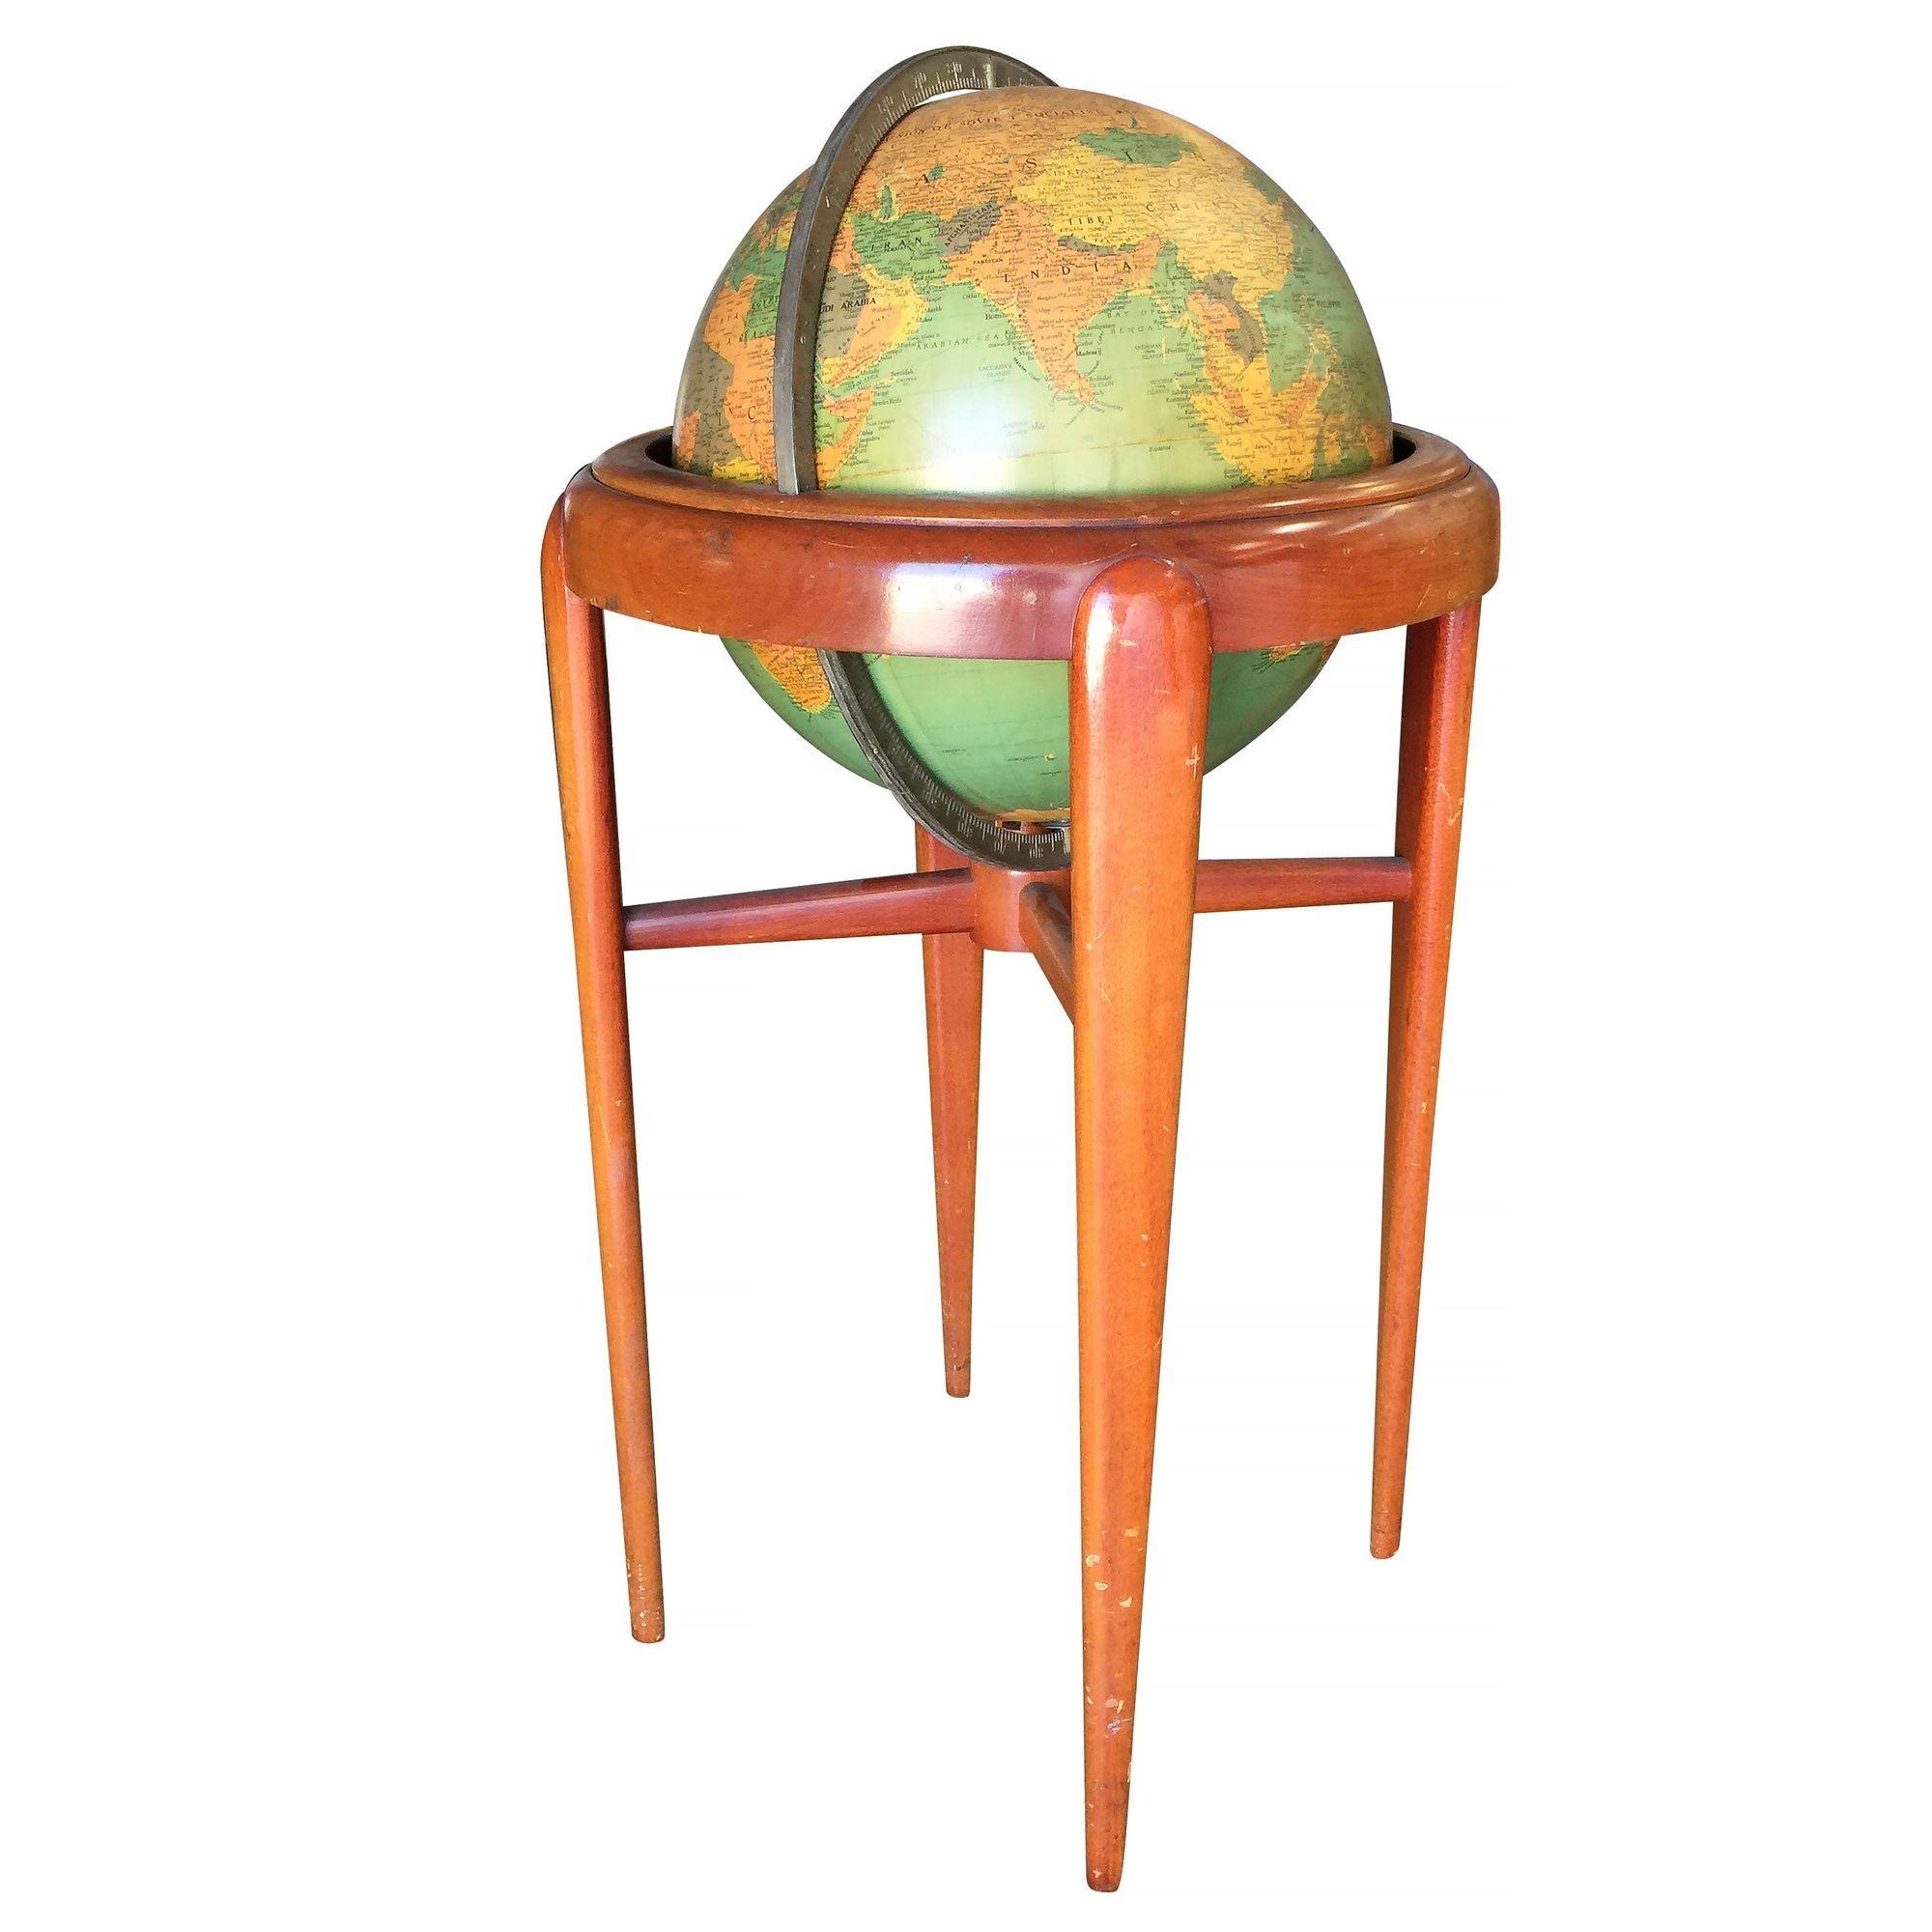 Mid-century era floor globe featuring a steel globe suspended by a mahogany stand. The globe rotates 360 degrees on two point axis comprised of metal ball bearings.

Manufactured by Replogle.